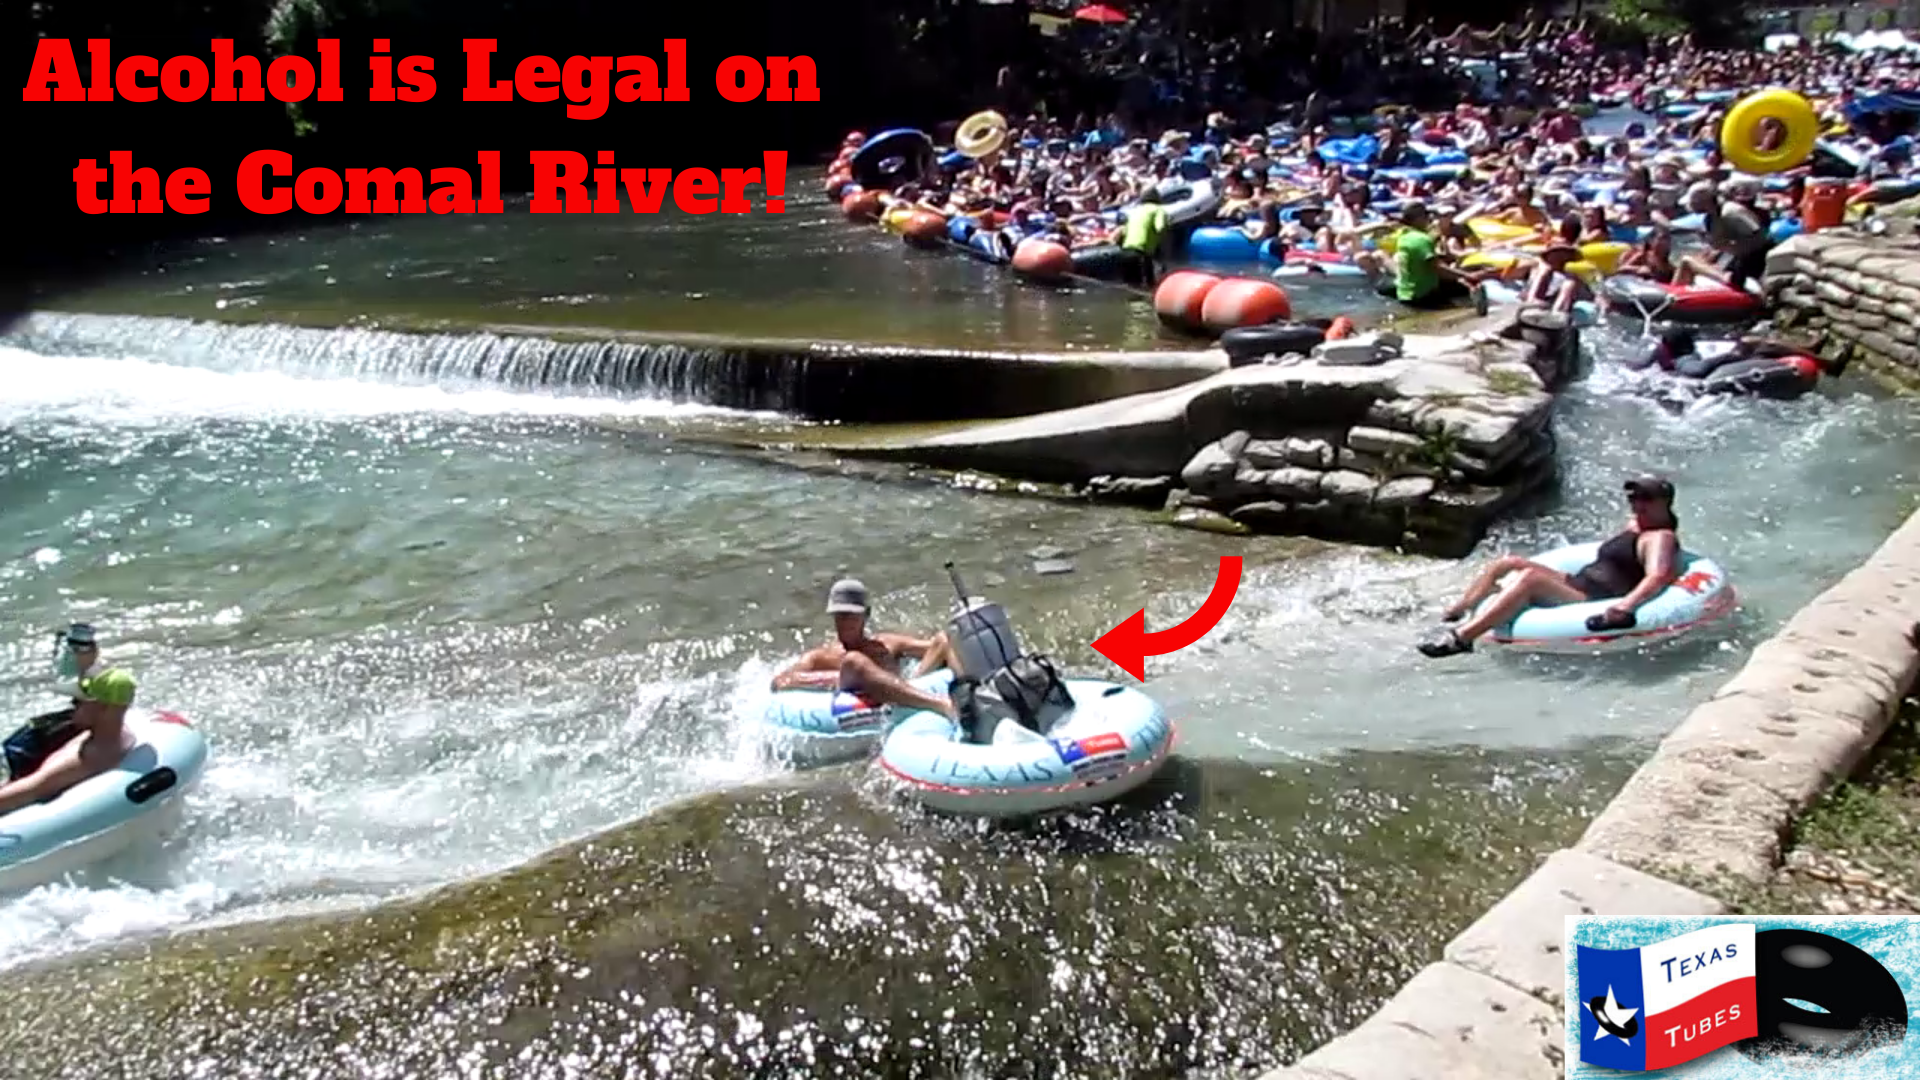 Alcohol is Legal on the Comal River in New Braunfels at Texas Tubes - Keg of Beer